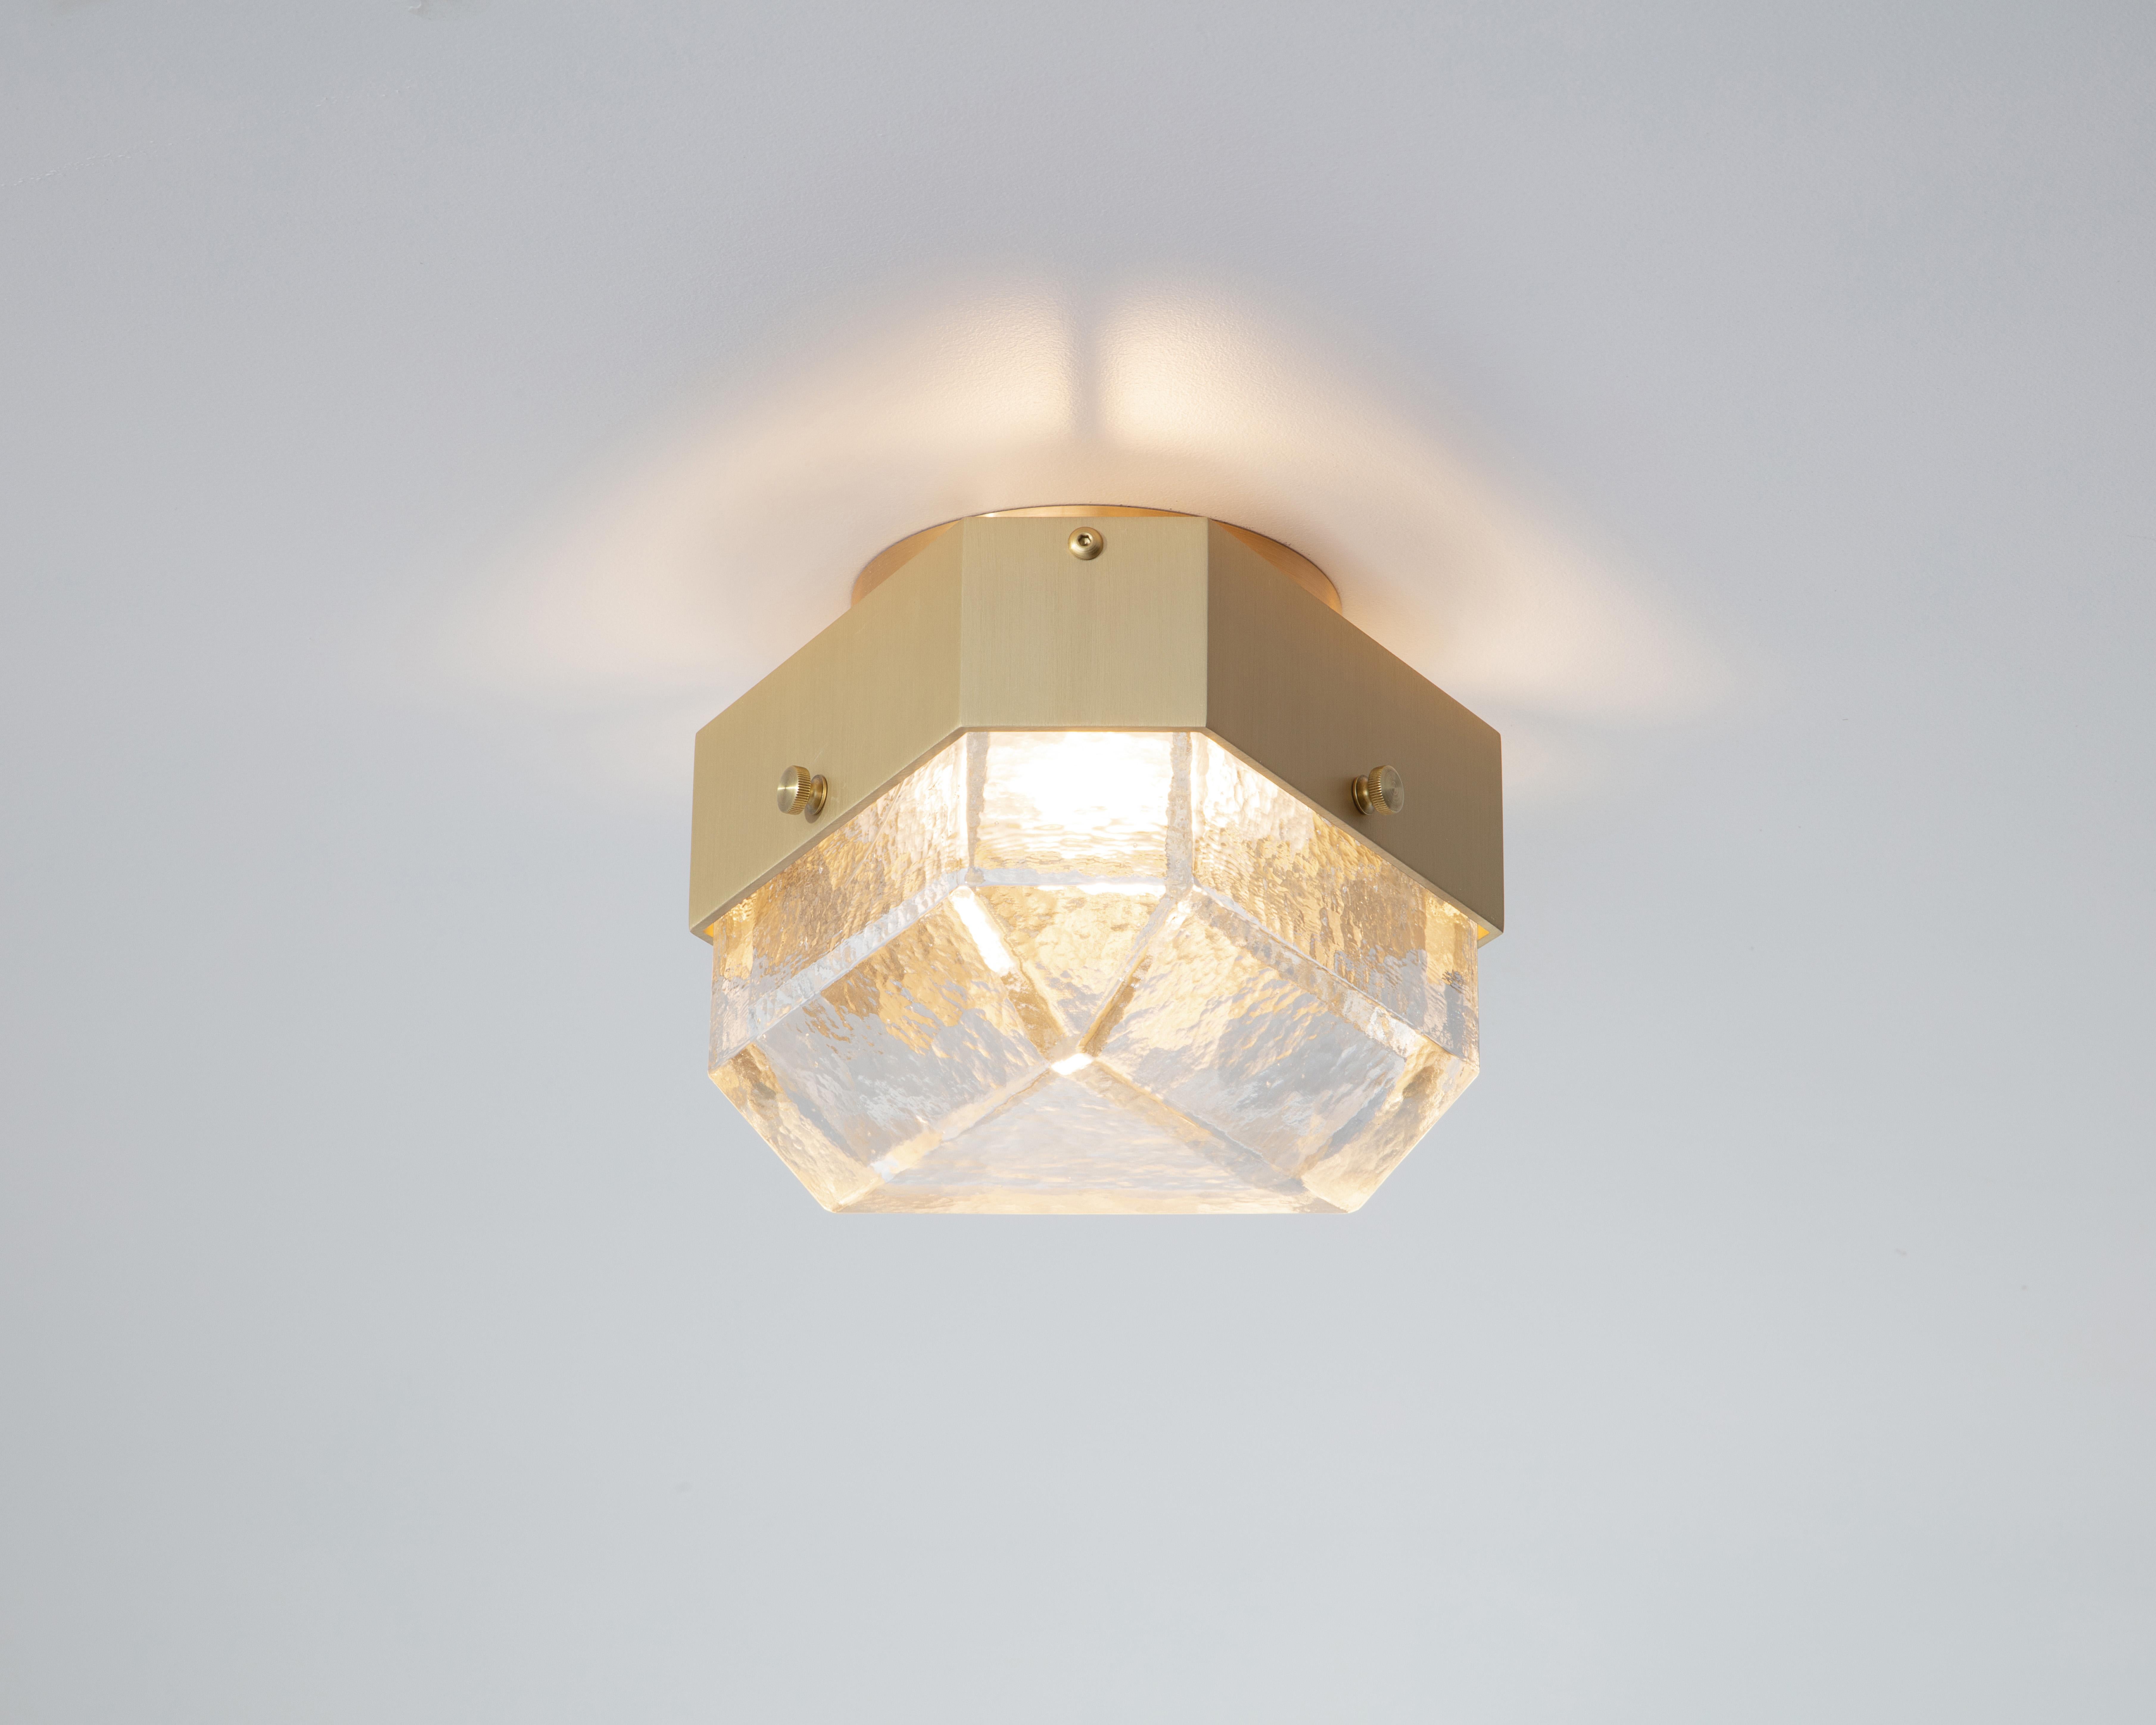 The Vega Uno is a geometric, modular, contemporary lighting fixture. Vega is suitable for installation on the ceiling as a flush mount, or on the wall as a sconce. The body is made from extruded aluminum with brass accents. The diffusers are cast